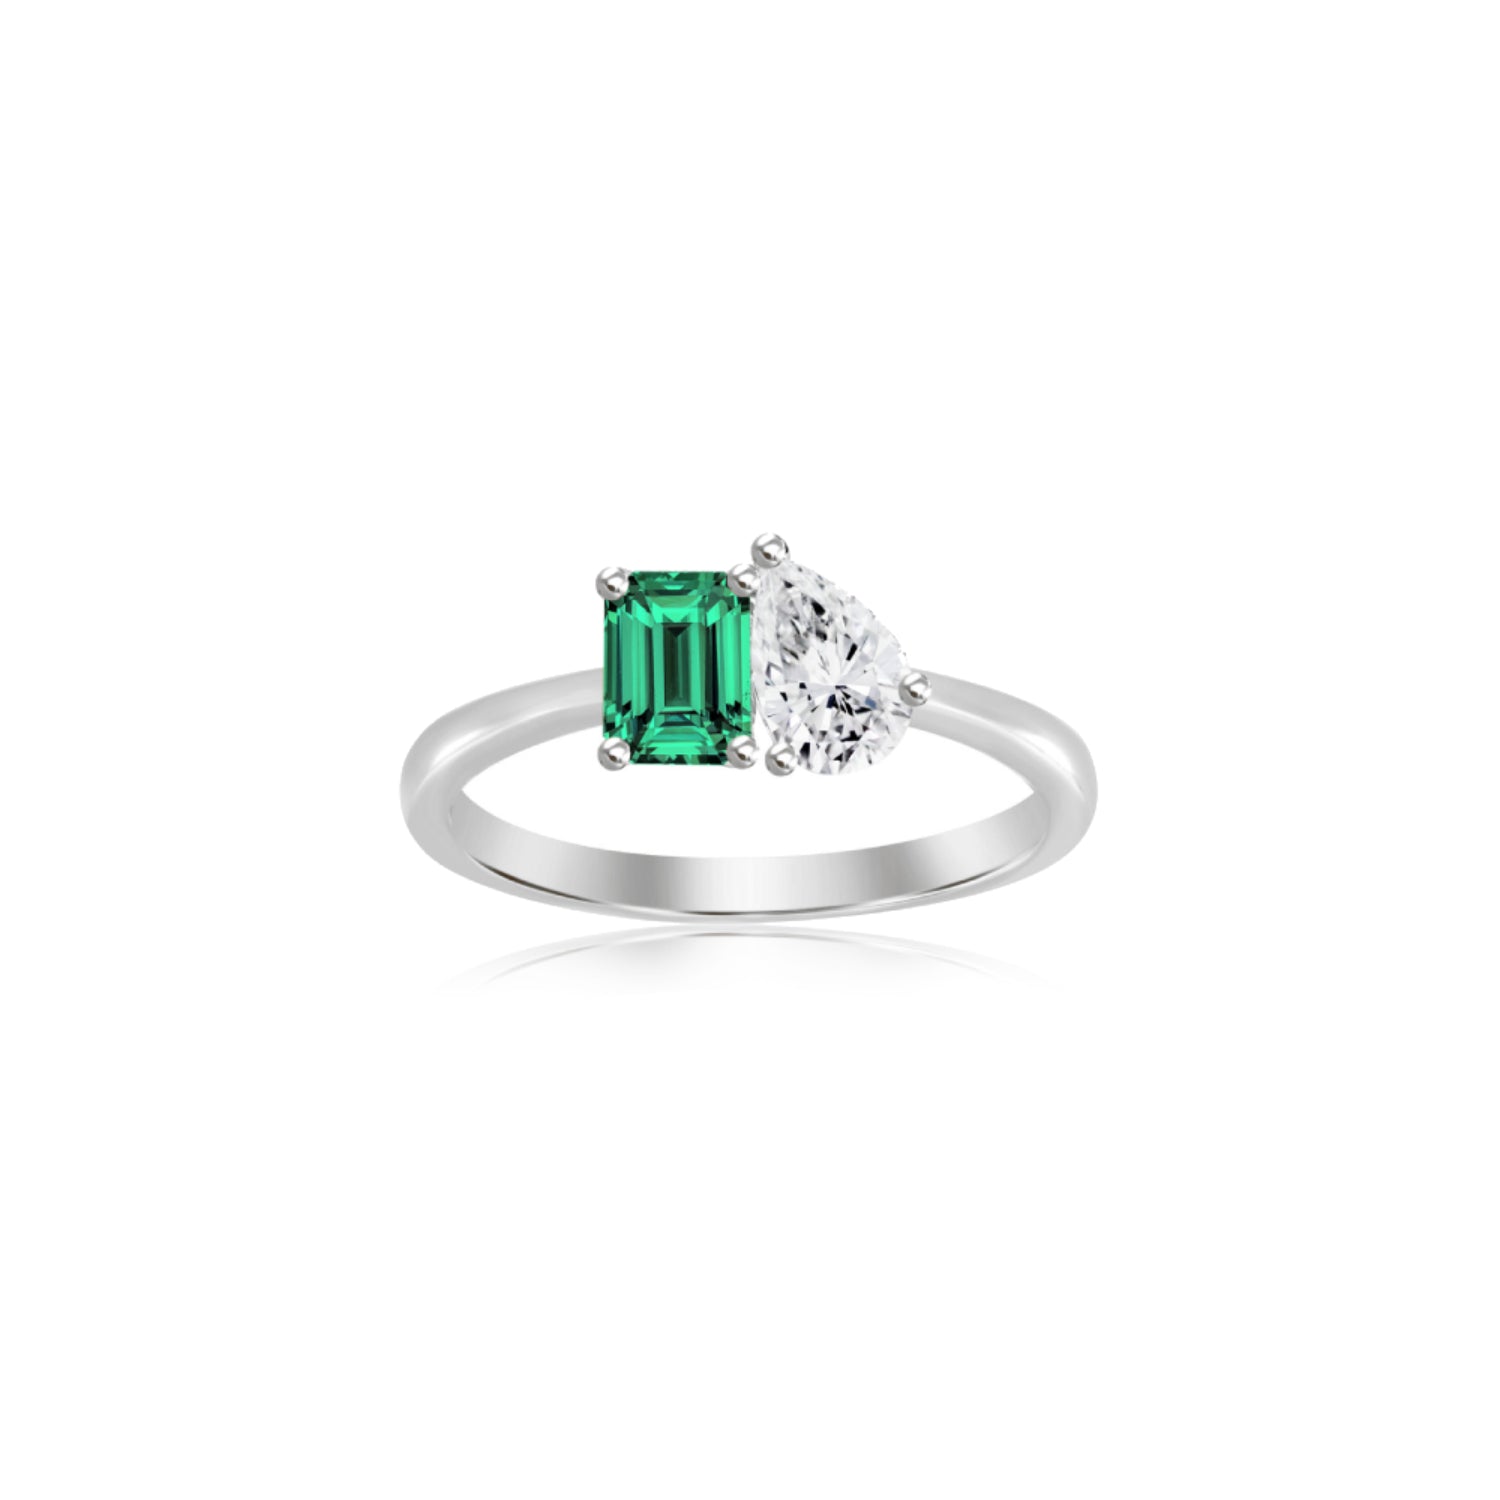 Emerald and Diamond Toi et Moi Engagement Ring in White Gold